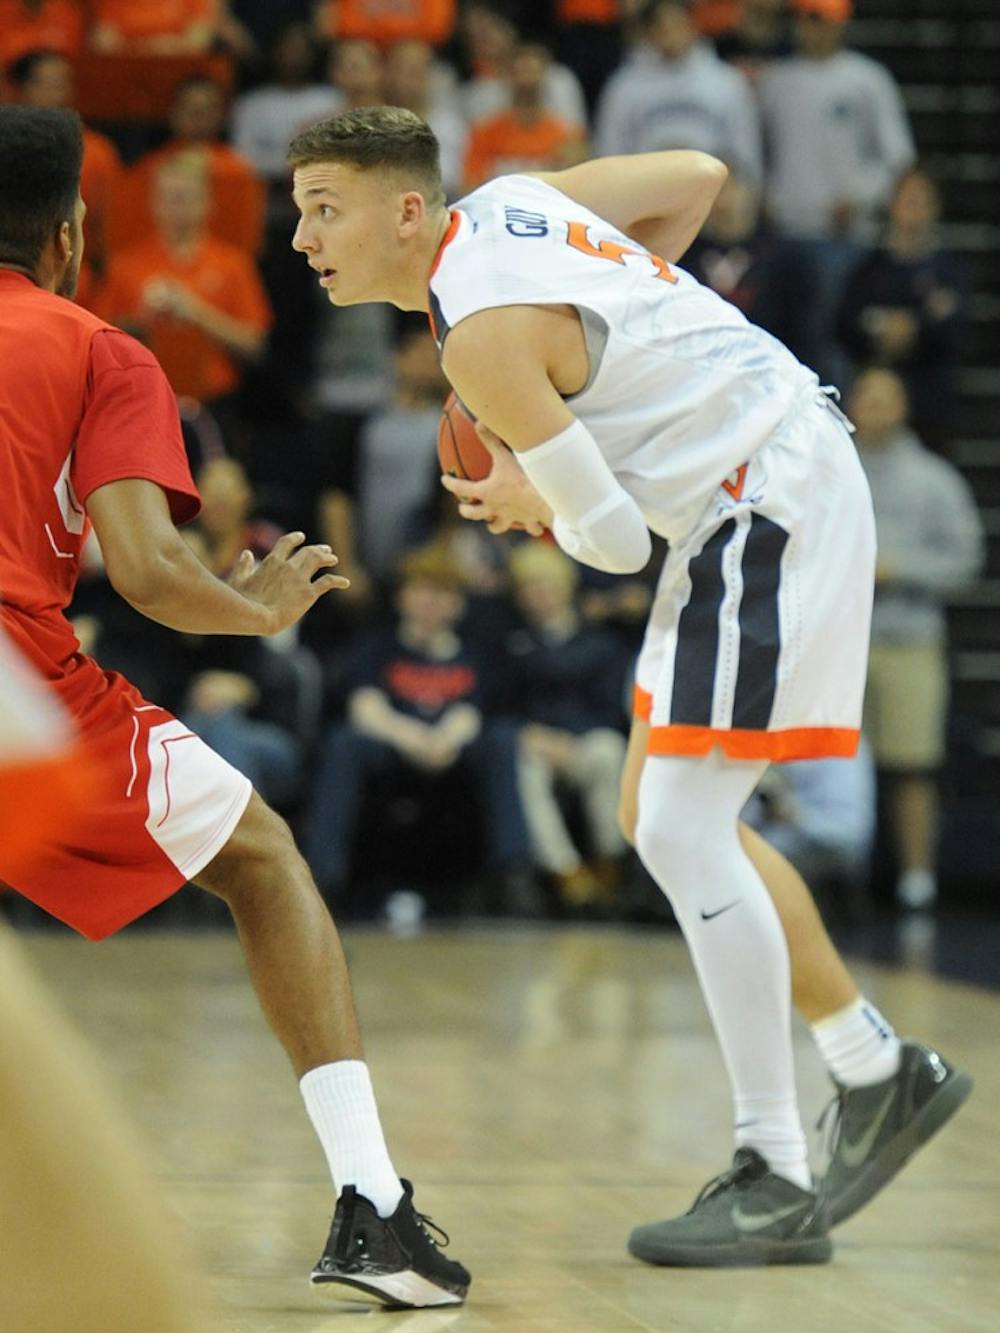 <p>Sophomore guard Kyle Guy scored a career-high 29 points in Virginia's road win over VCU.&nbsp;</p>